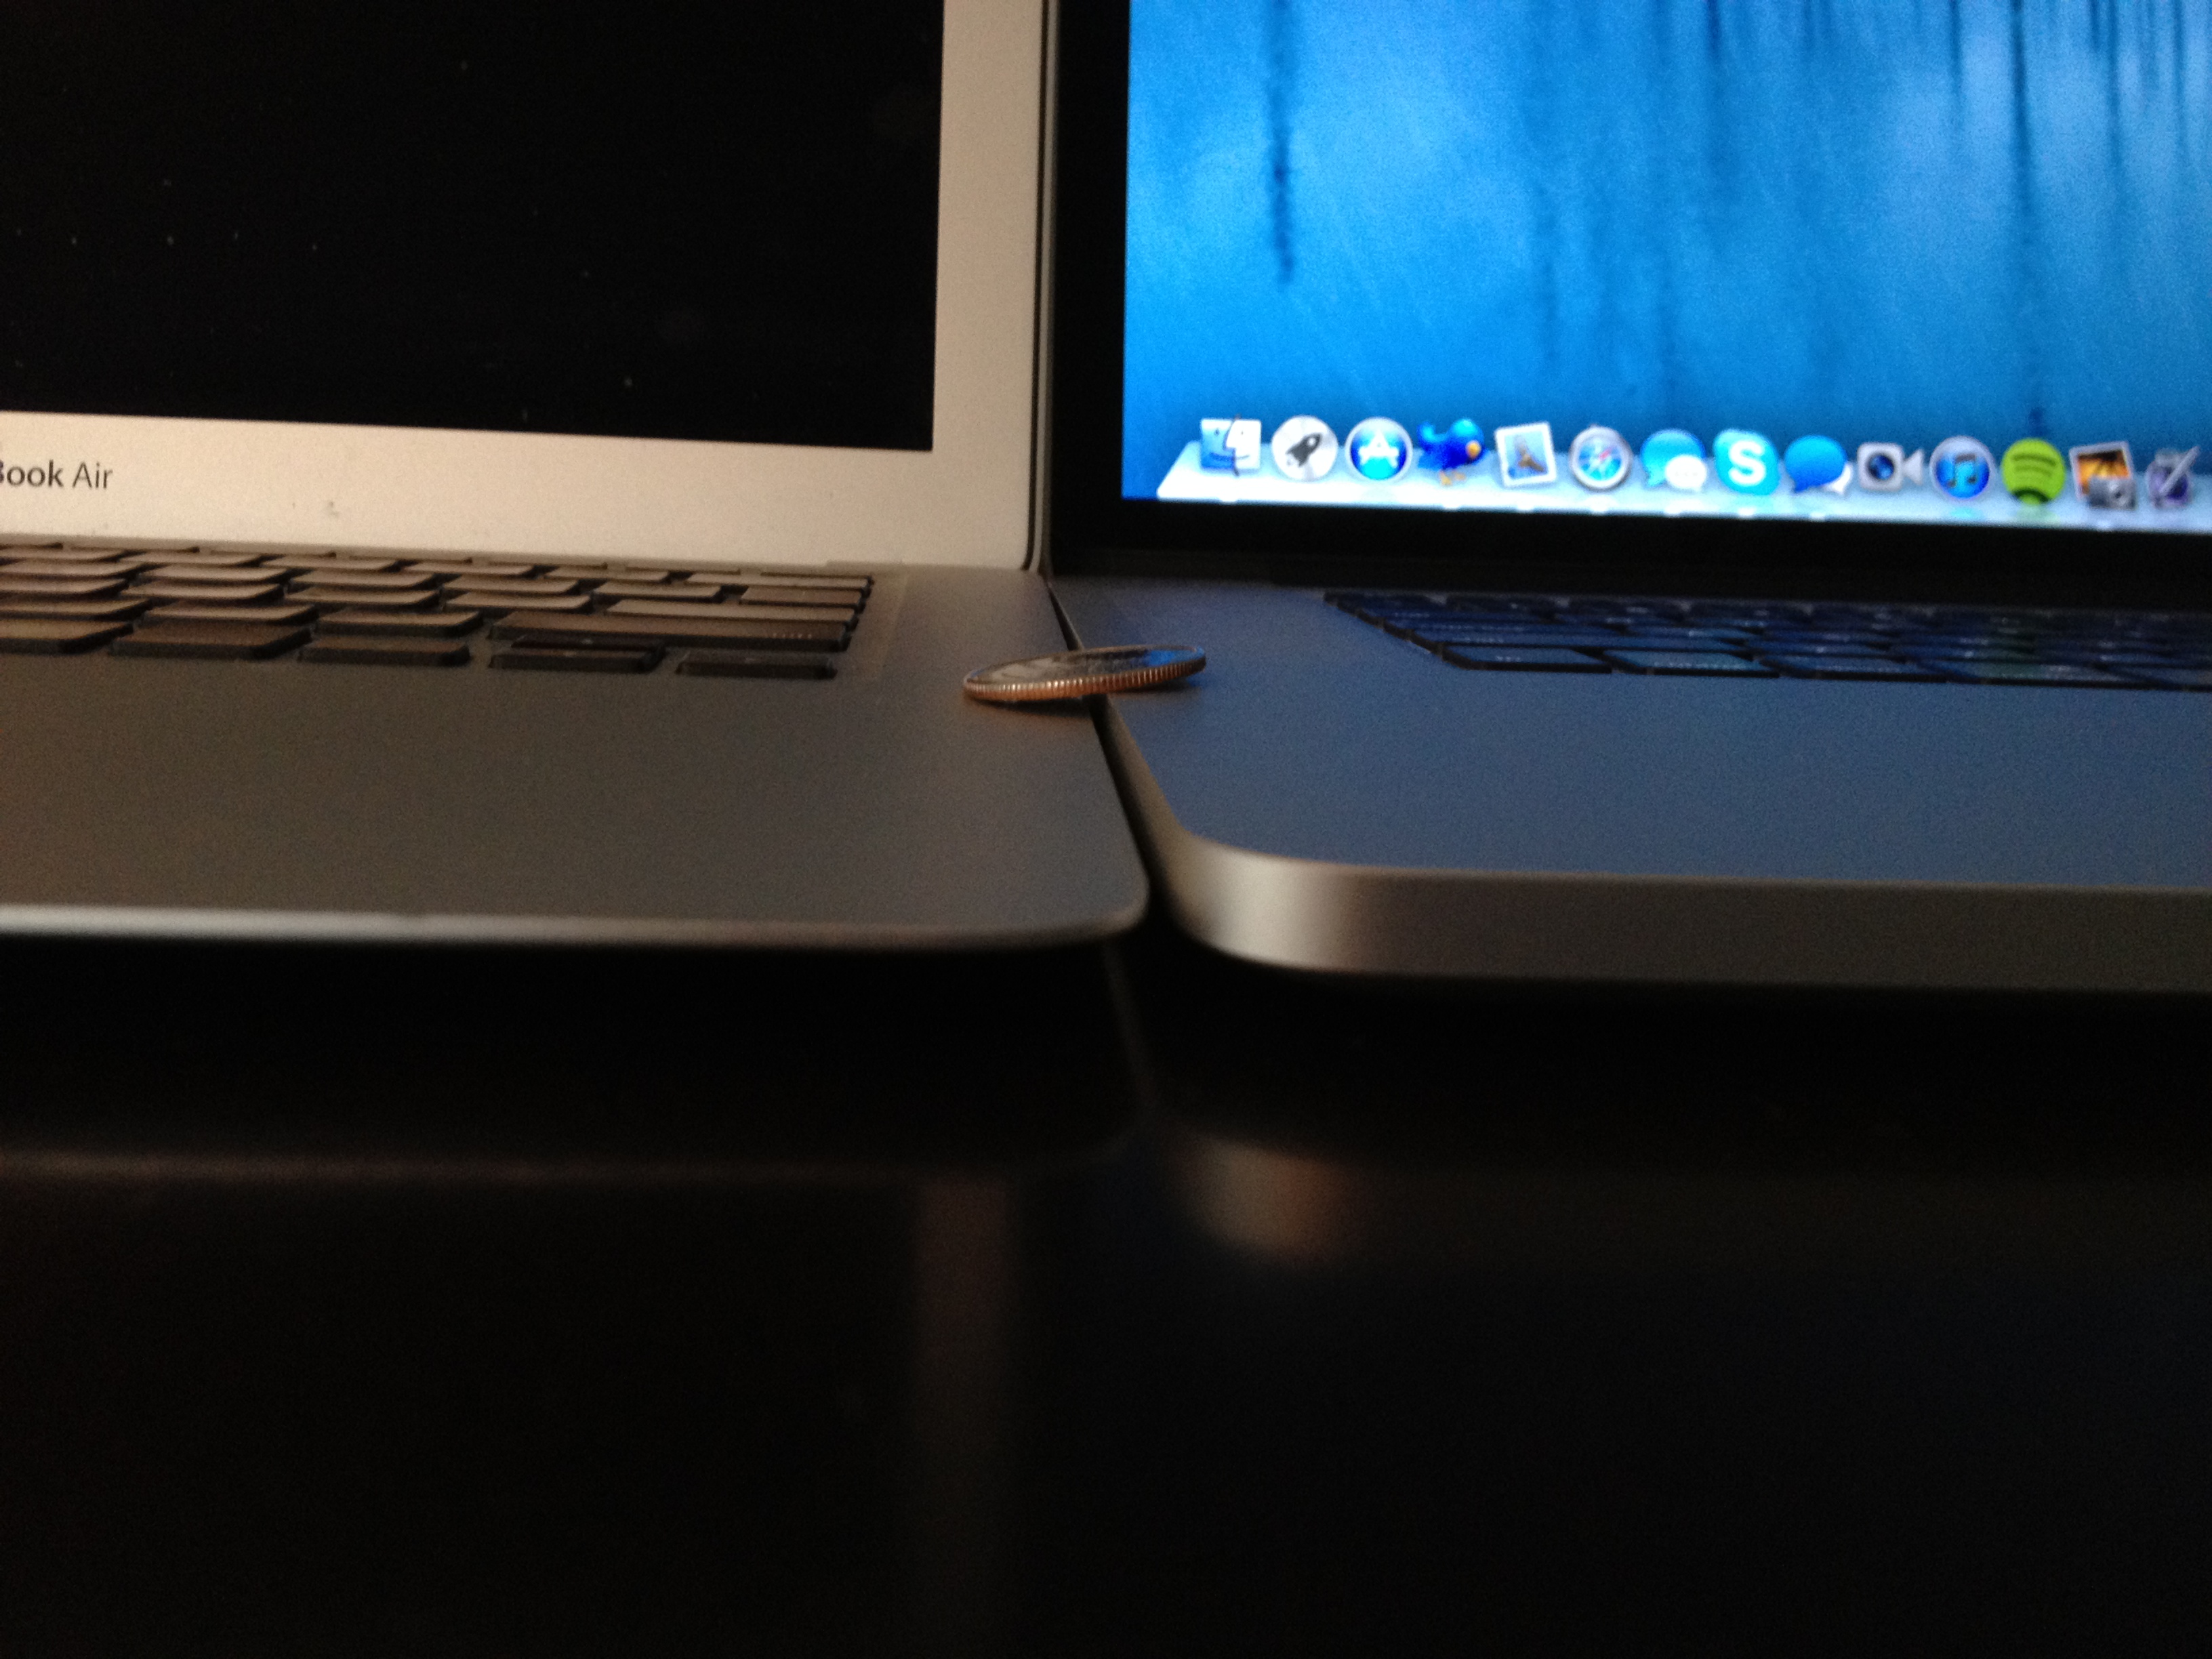 Review: 15-inch MacBook Pro with Retina display - 9to5Mac